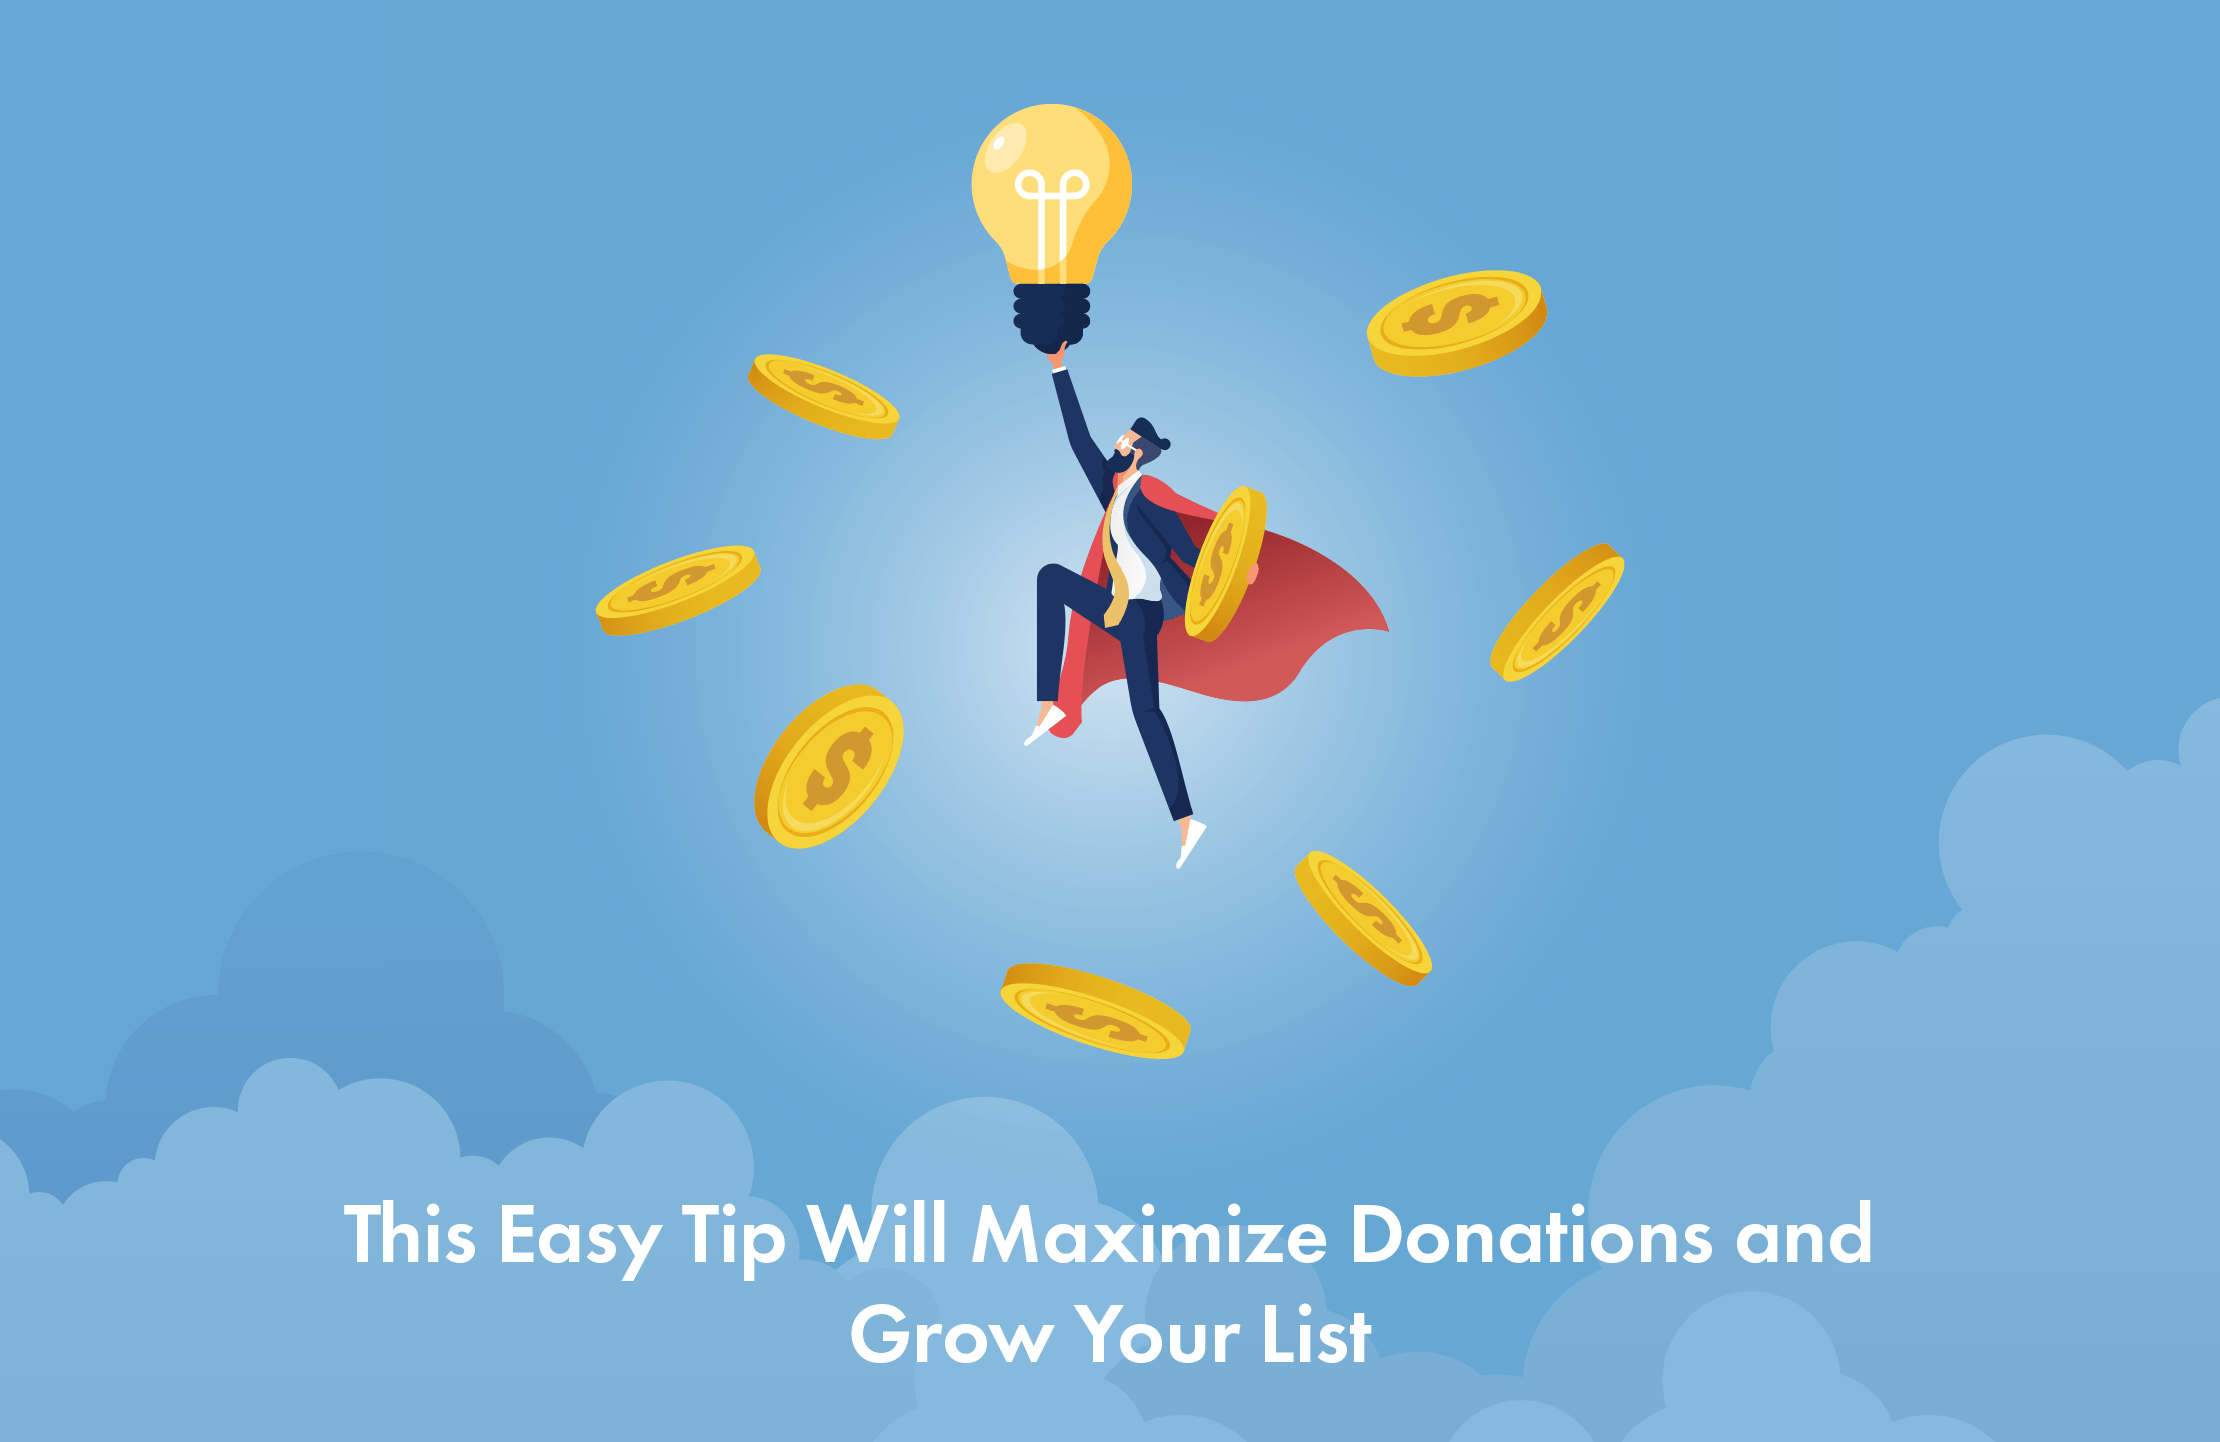 This Easy Tip Will Maximize Donations and Grow Your List